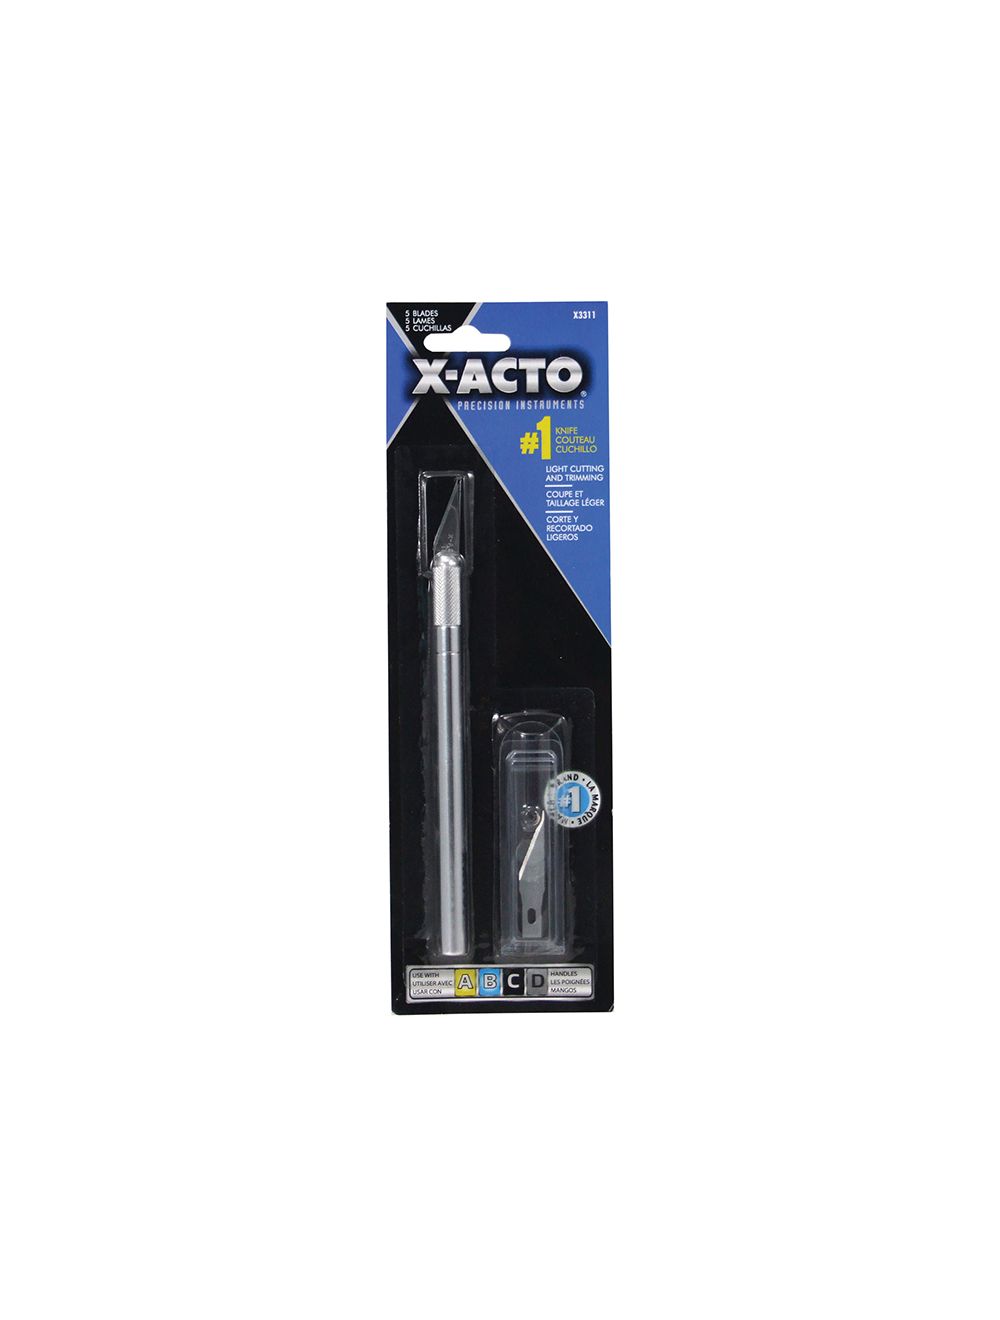 X-Acto Knife #1 with 5 Blades